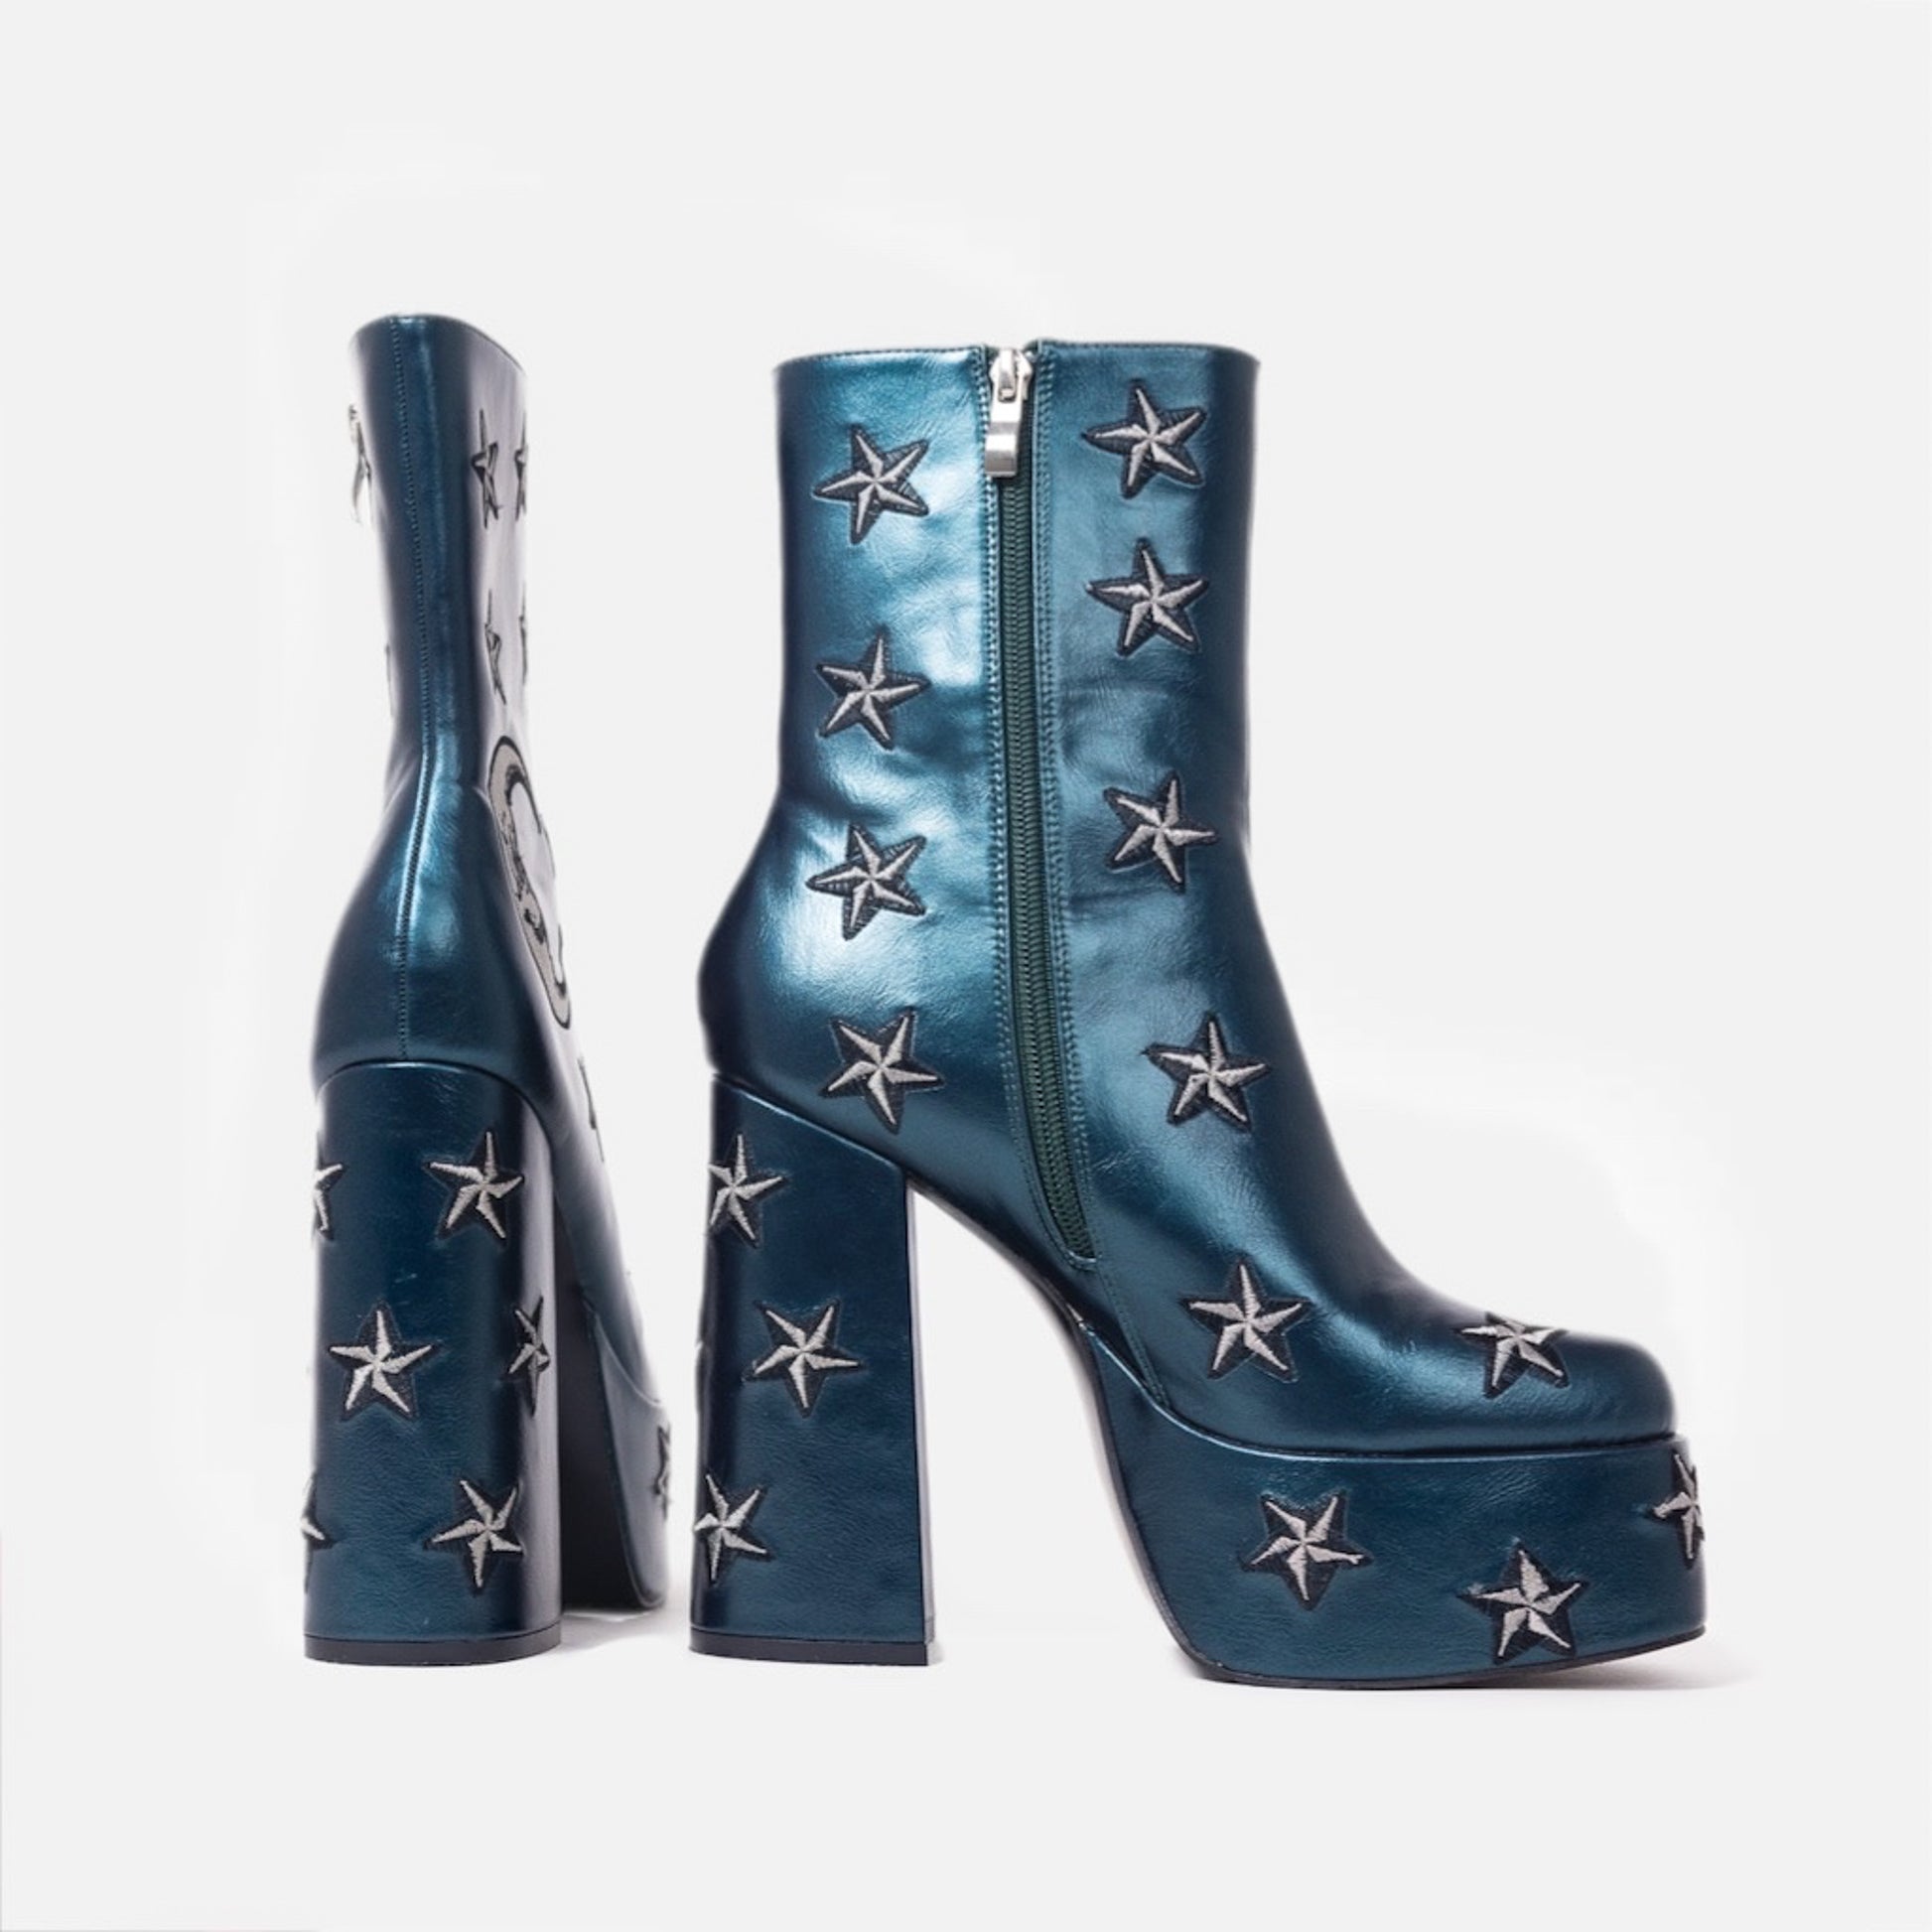 Dreams of Mooncraft Teal Heeled Boots - Ankle Boots - KOI Footwear - Blue - Back and Side View